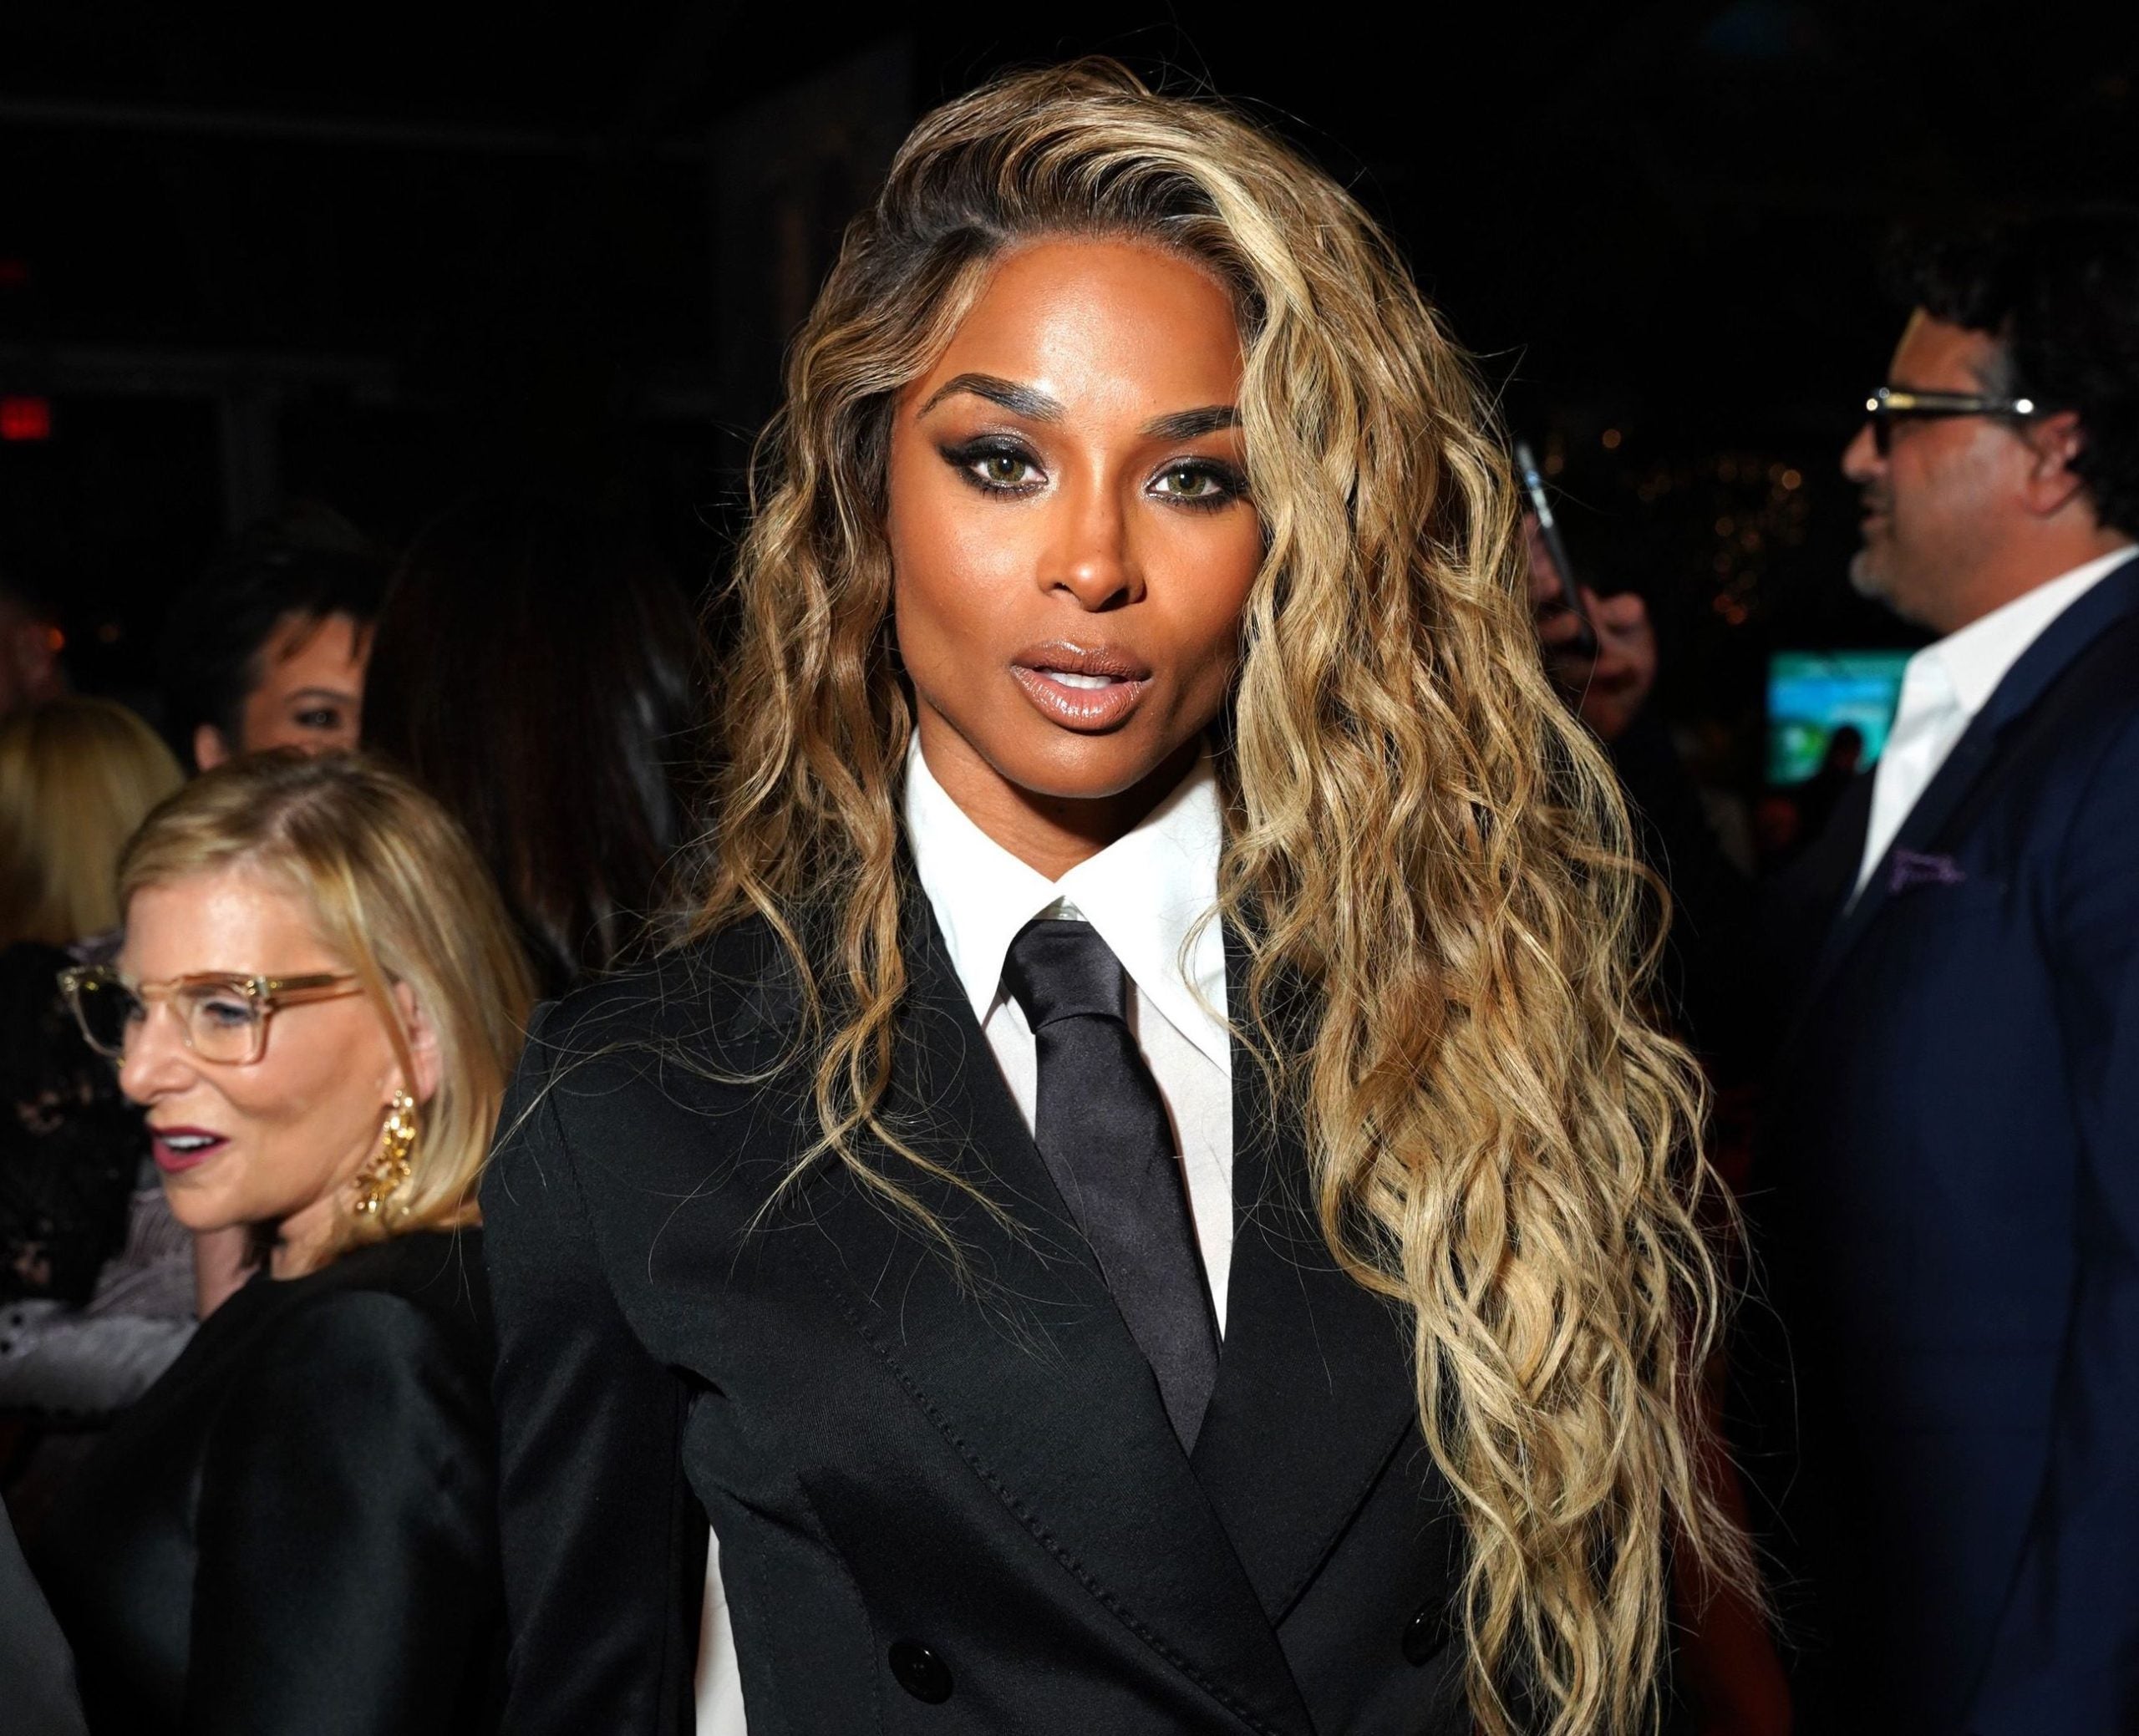 Ciara Opens Up On New Year's Plans And Co-Hosting 'Dick Clark's New Year's Rockin' Eve'